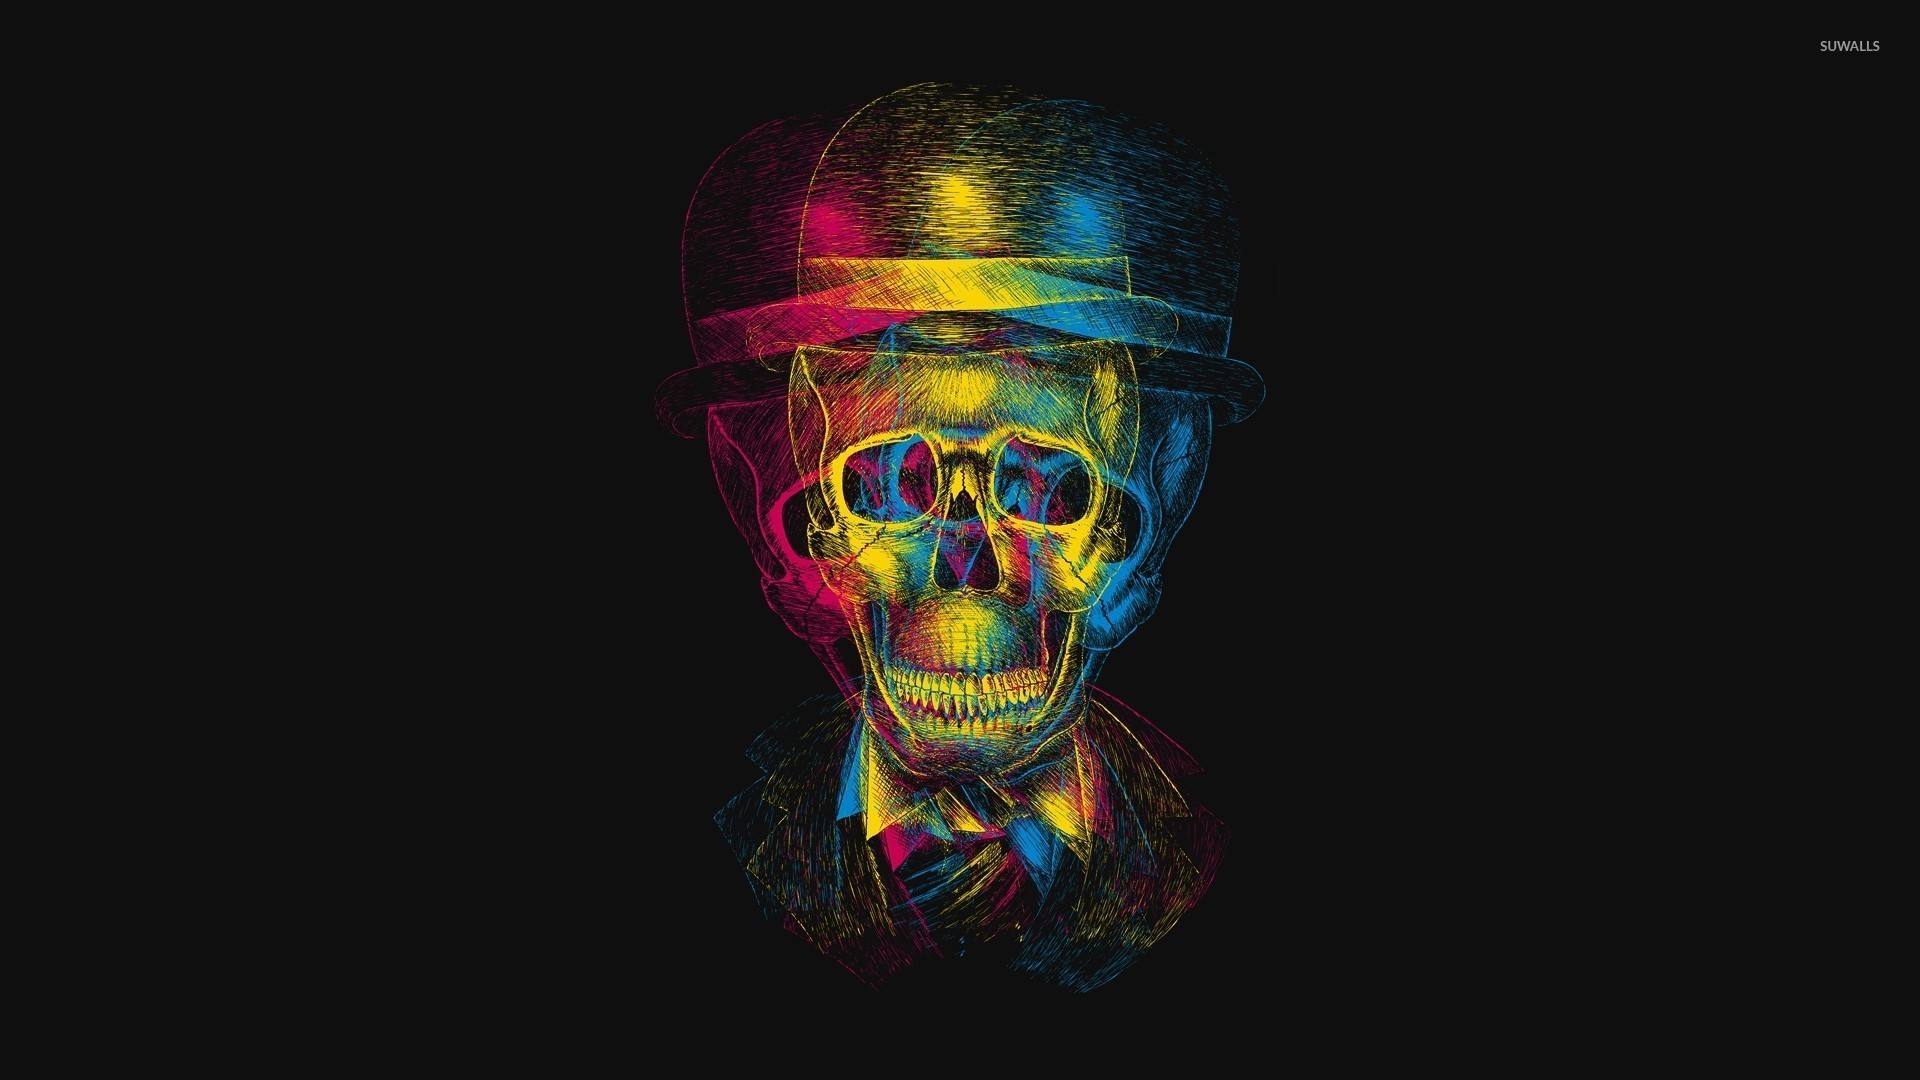 CMYK skull with top hat wallpaper Artistic wallpapers